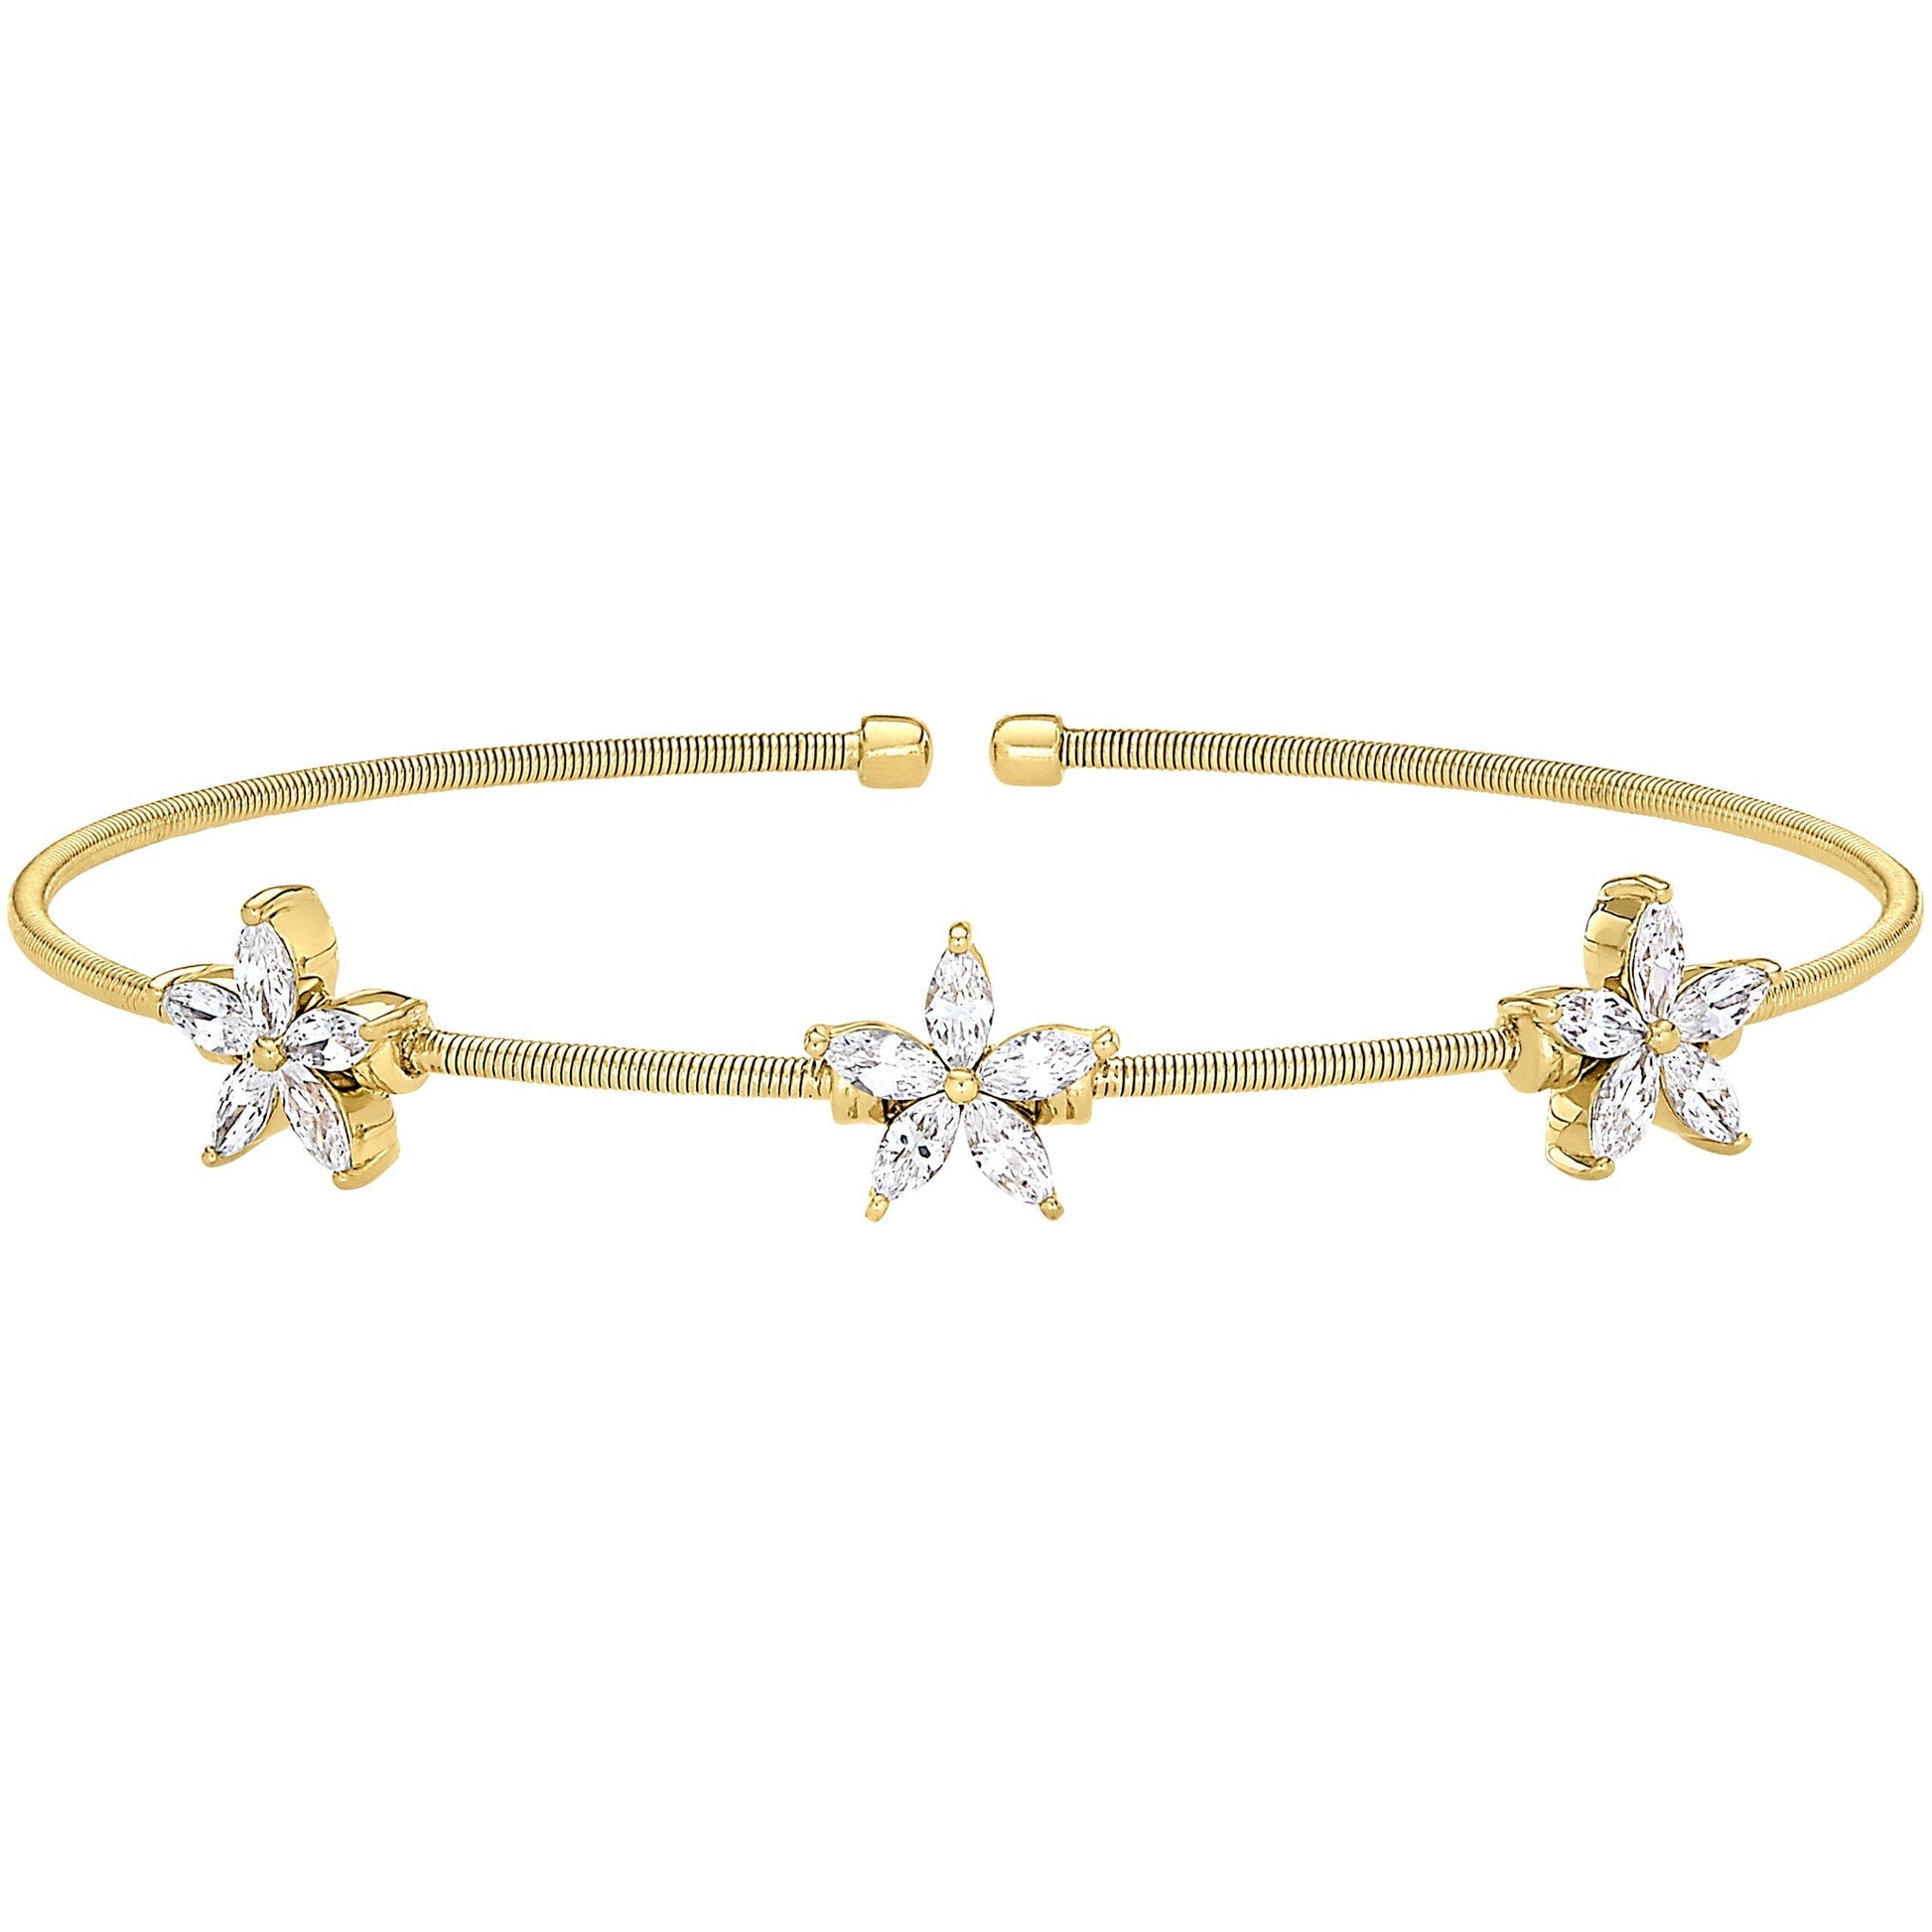 A cable bracelet with simulated diamond flowers displayed on a neutral white background.